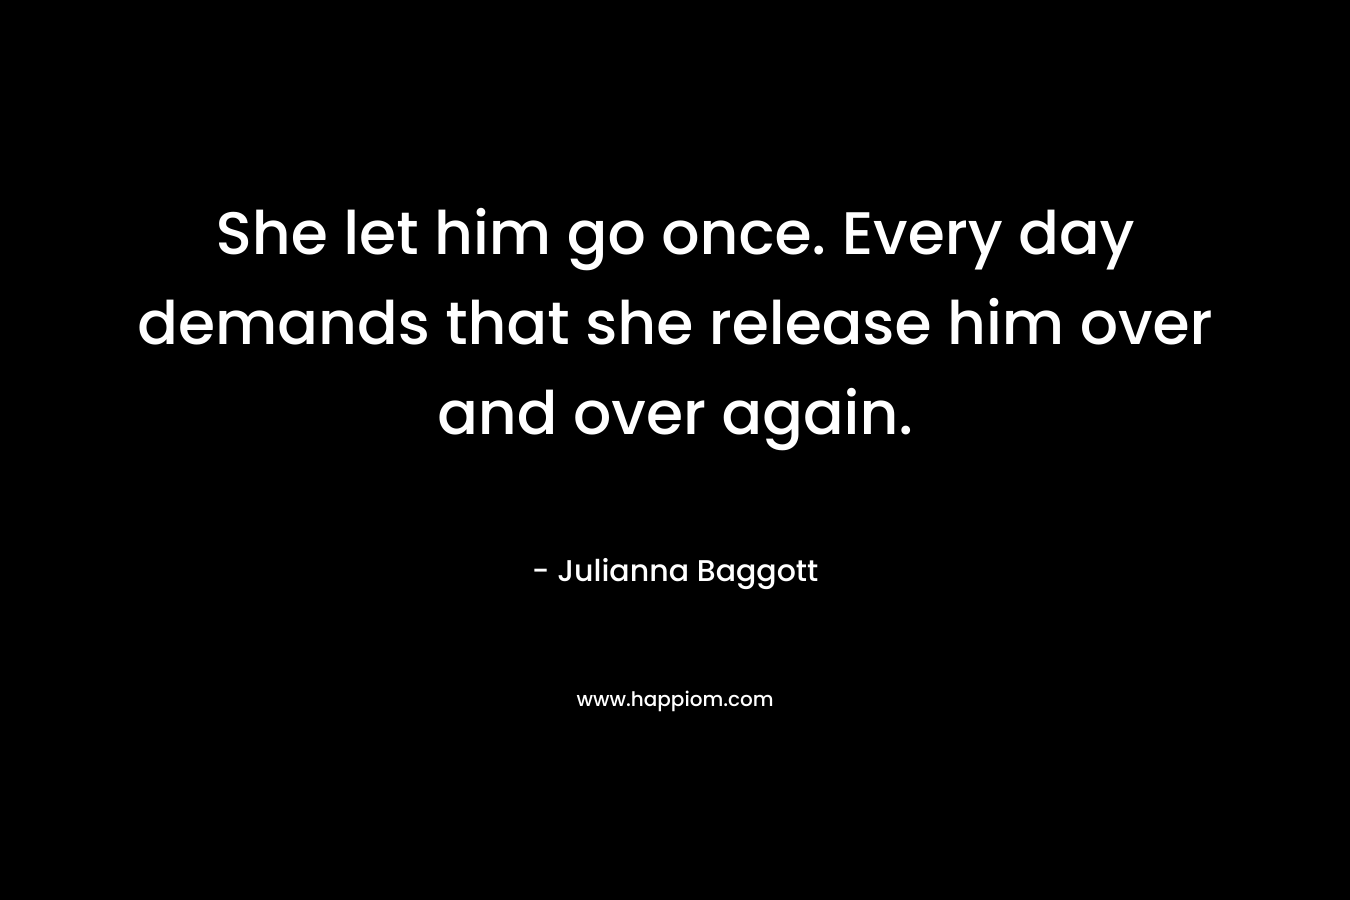 She let him go once. Every day demands that she release him over and over again. – Julianna Baggott